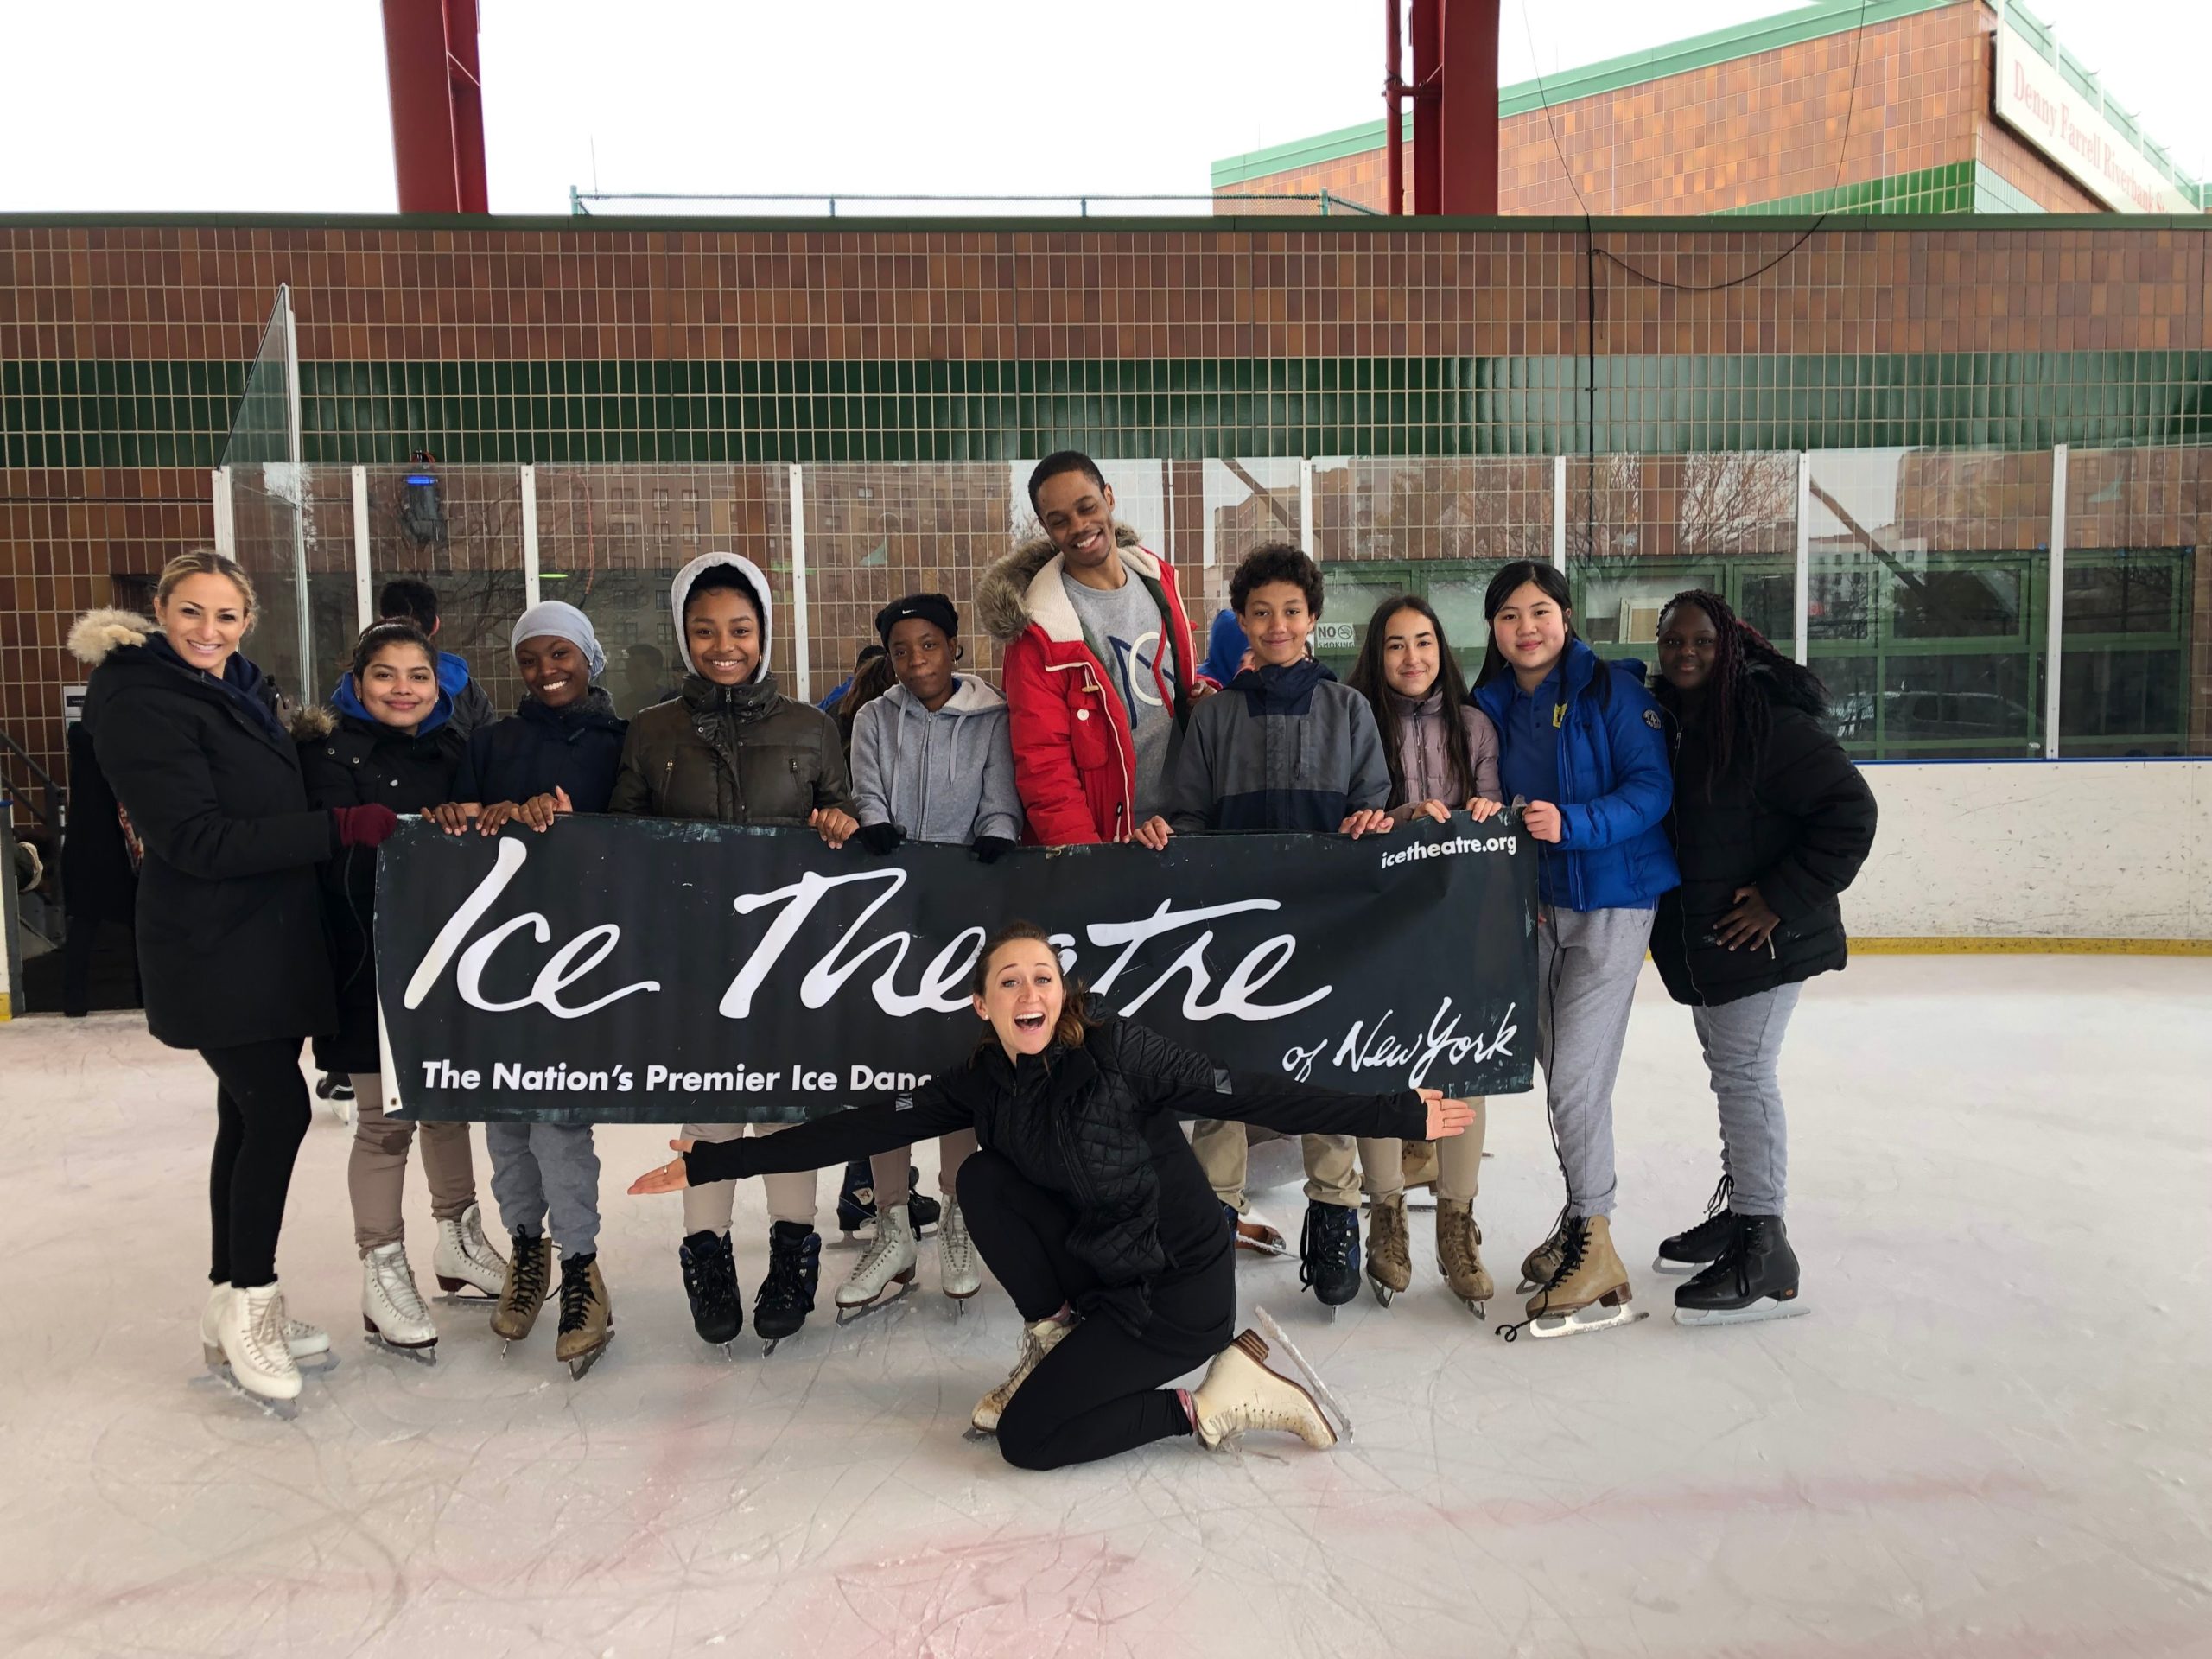 Ice Theatre of New York brings free performances to NYC students